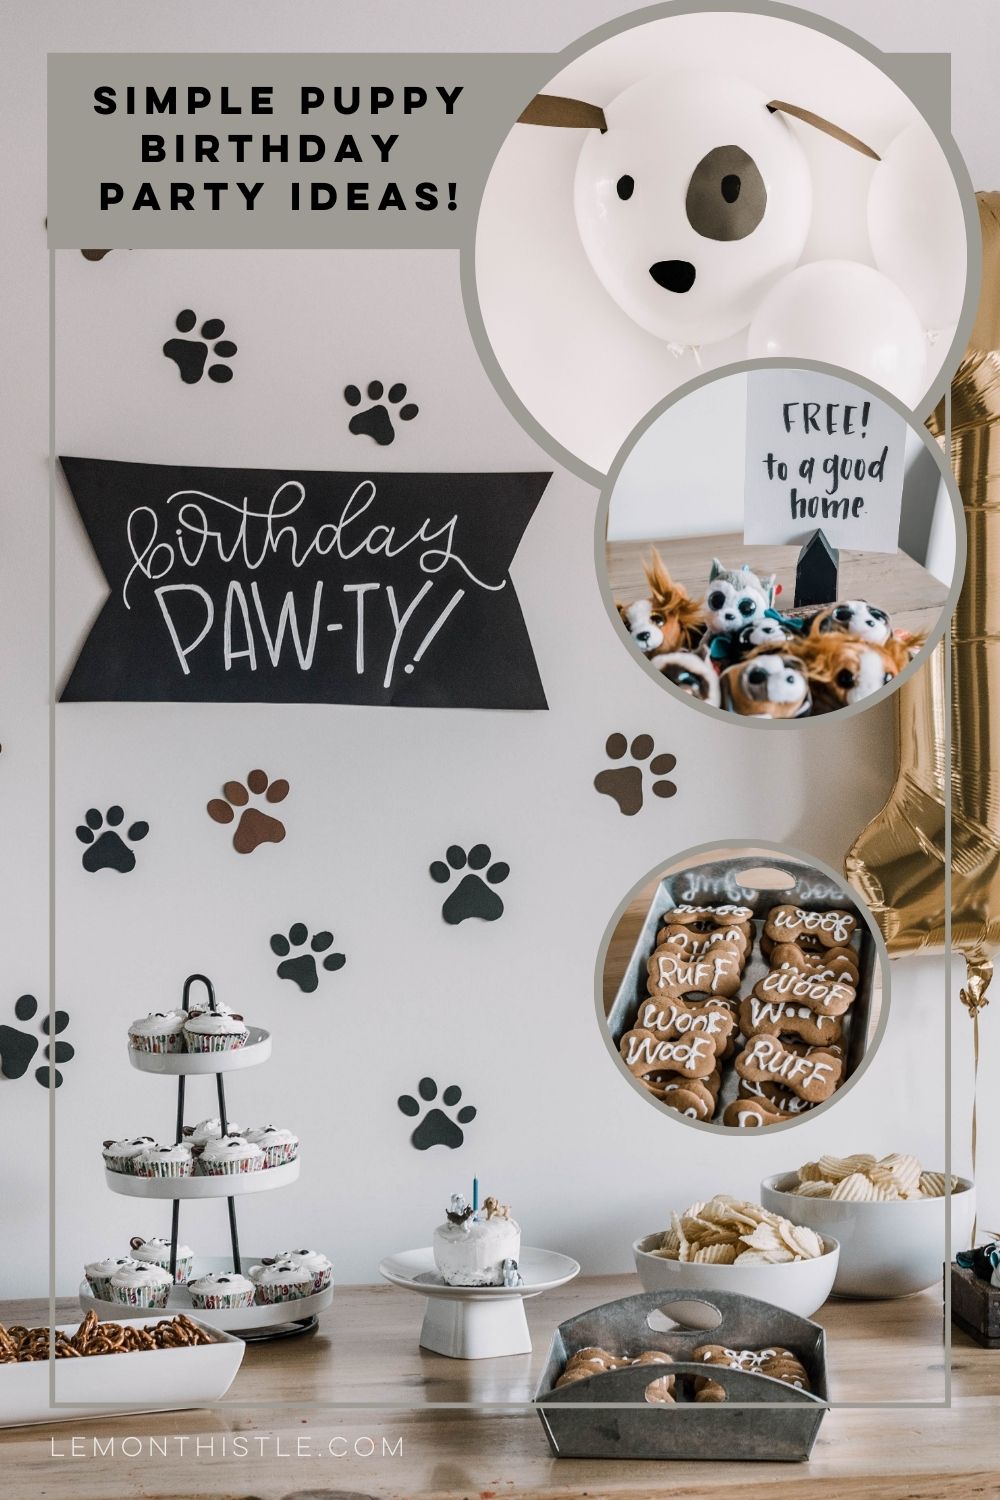 image of full first birthday puppy themed party table setup with paw prints on wall and 'puppy paw-ty' sign, overlay of image with tiny stuffed animals with 'free to a good home' sign, DIY puppy balloons and bone shaped cookies